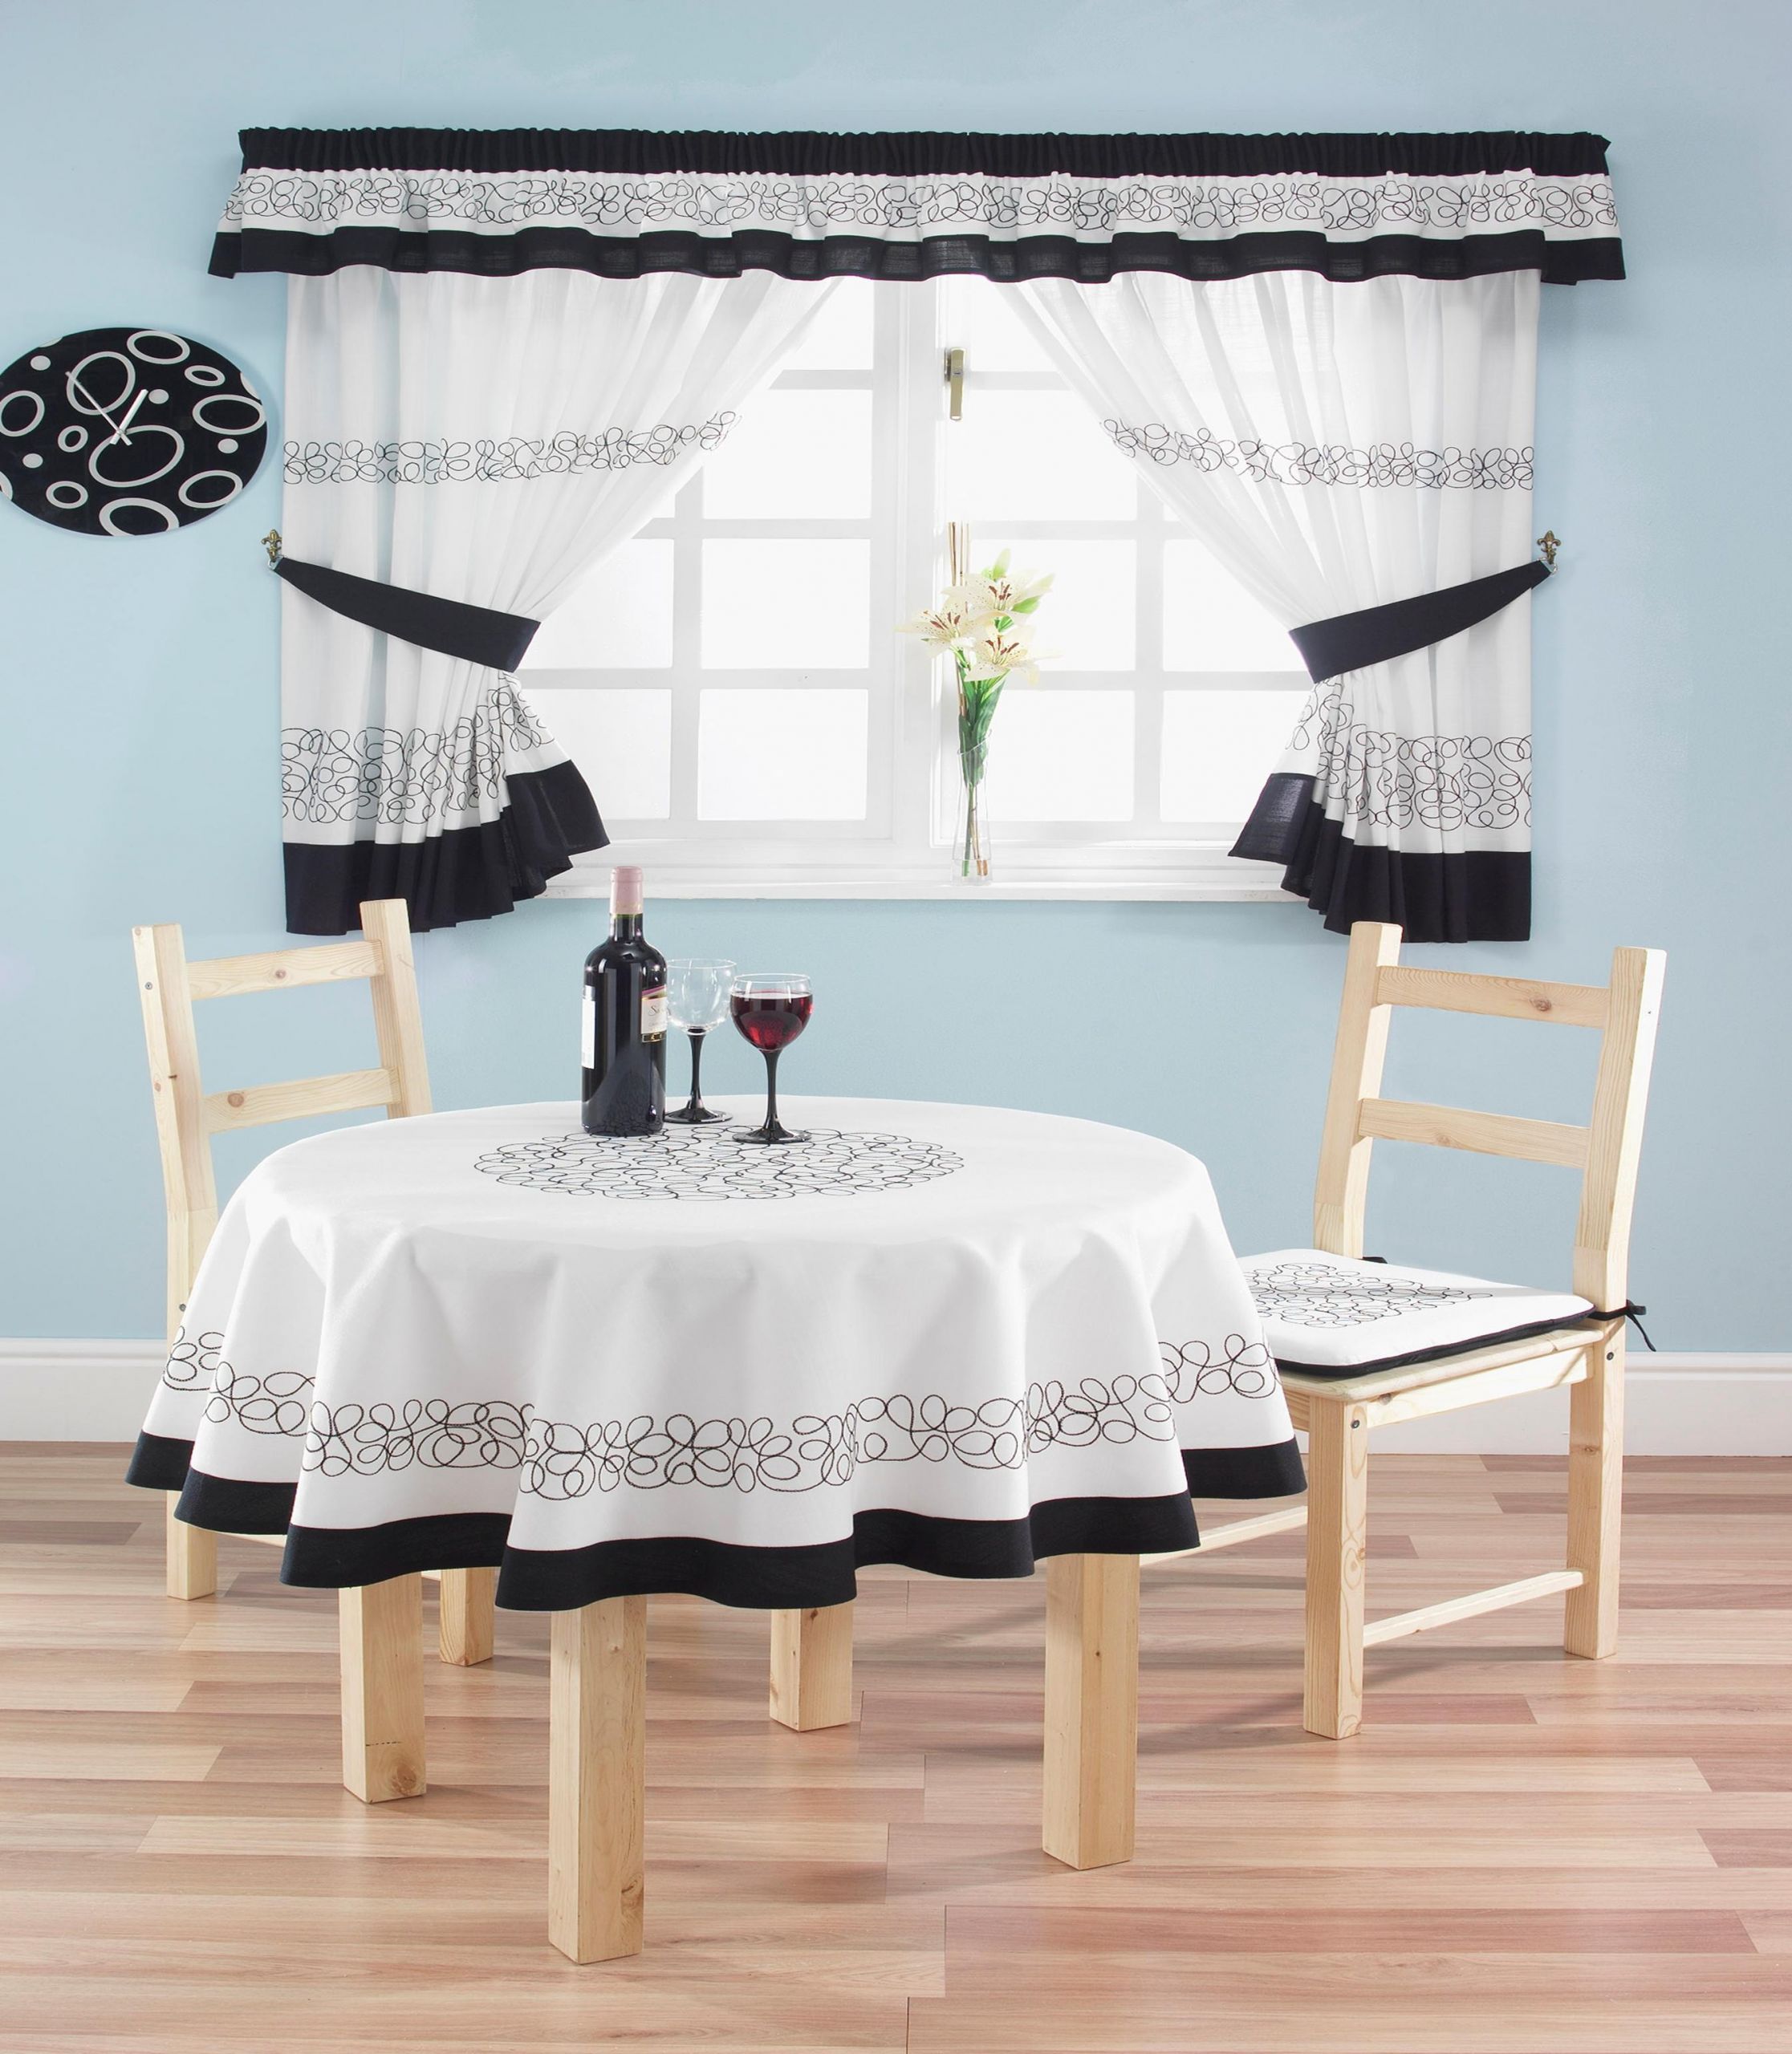 Modern Kitchen Curtains And Valances
 Modern Country Kitchen Curtains with Tie Backs 66x54